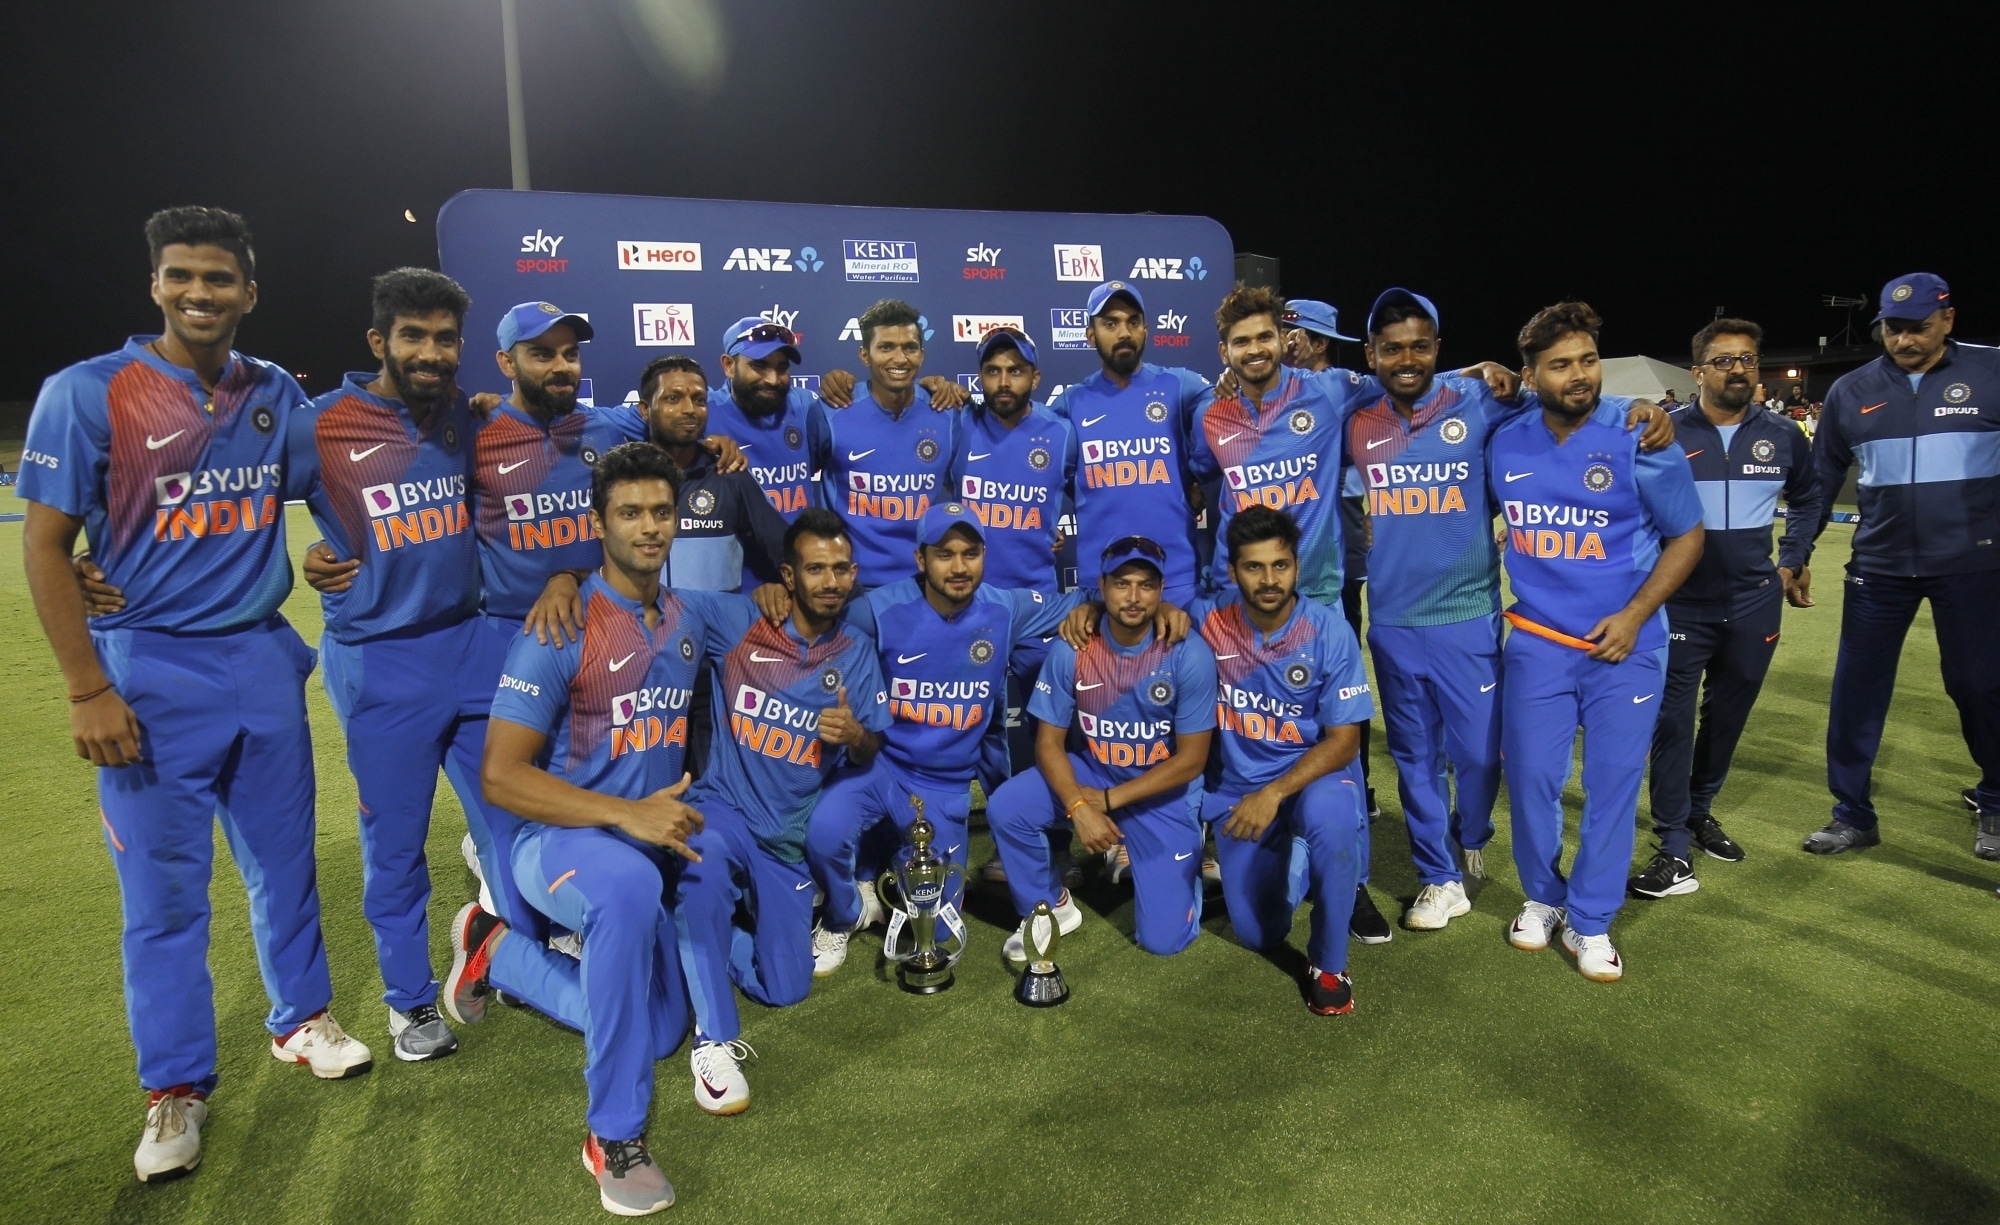 Mount Maunganui: Indian players pose with the Winners Trophy after India scripted an unprecedented 5-0 series whitewash with a seven-run victory against New Zealand in the fifth and final T20I at Bay Oval, Mount Maunganui in New Zealand on Feb 2, 2020. (Photo: Surjeet Yadav/IANS)